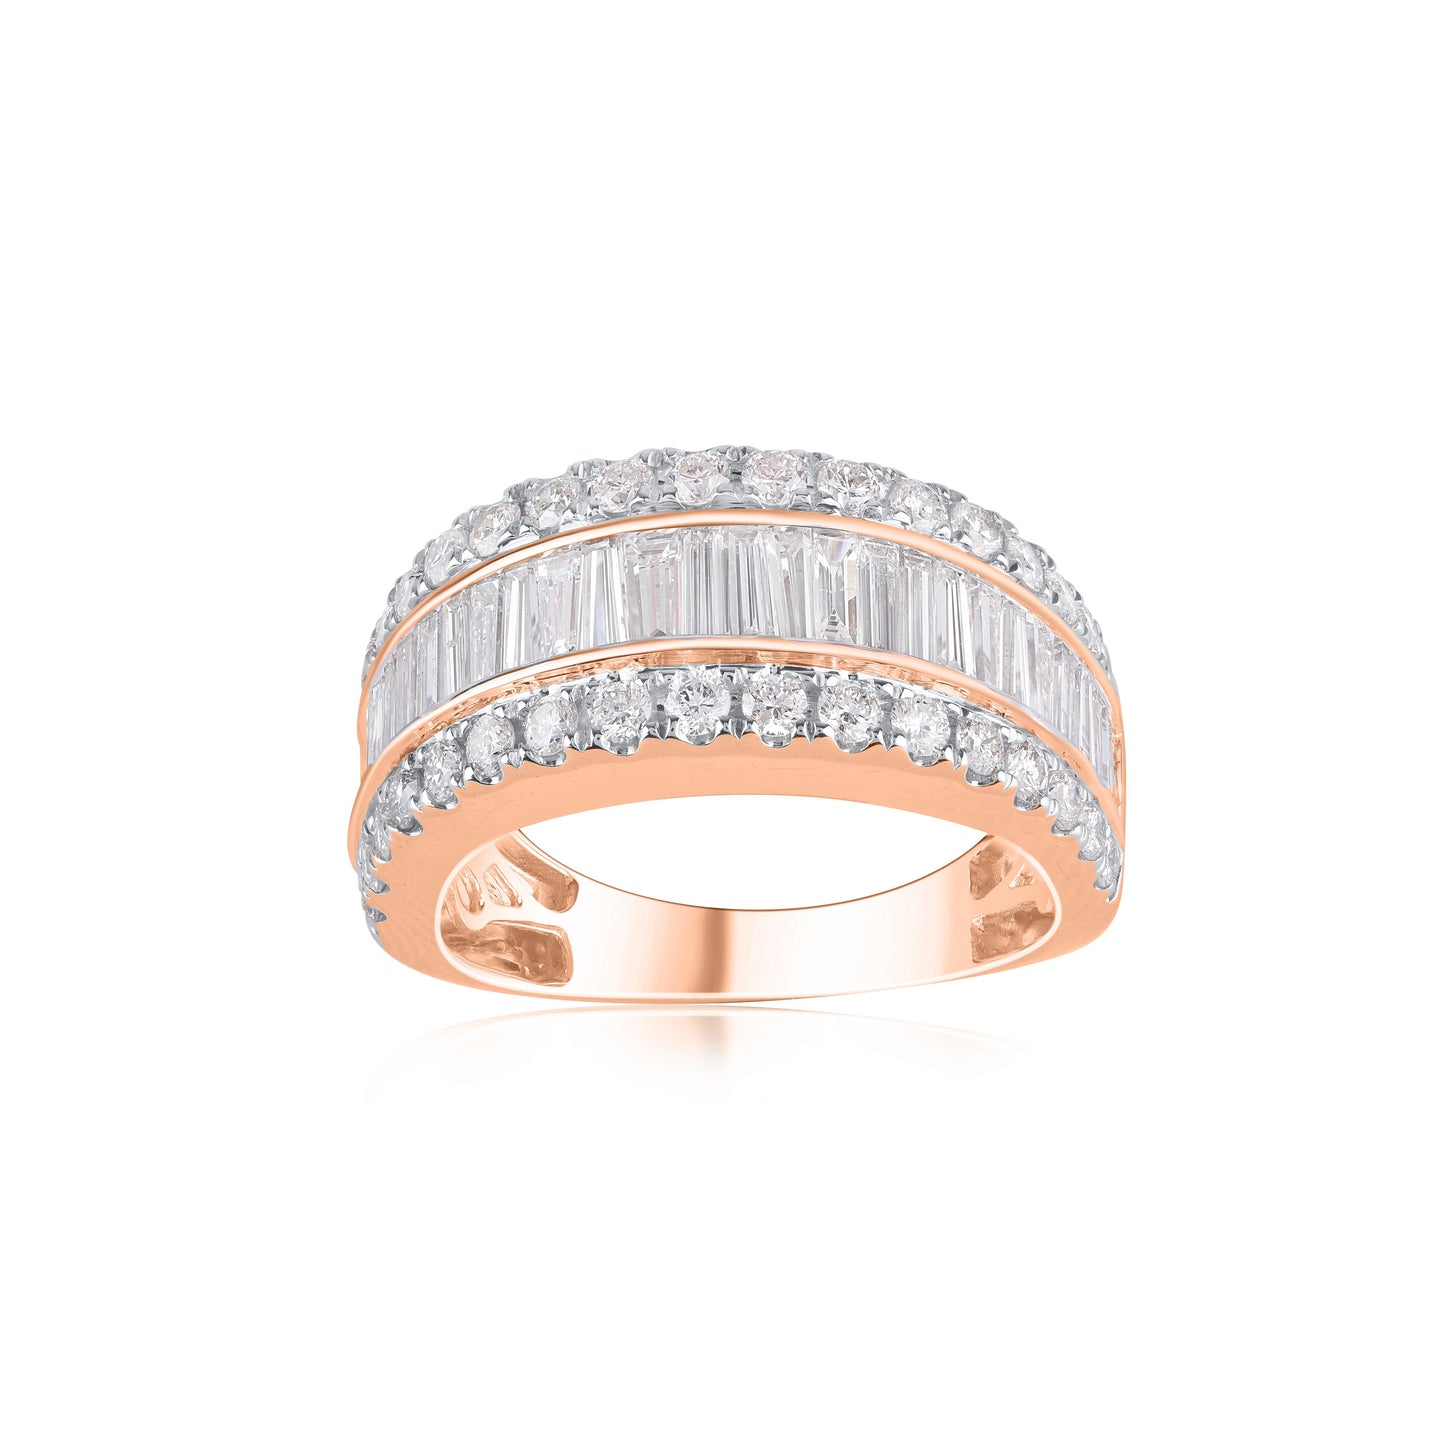 Baguette and Round Diamond Wedding Band Ring in 18K Gold